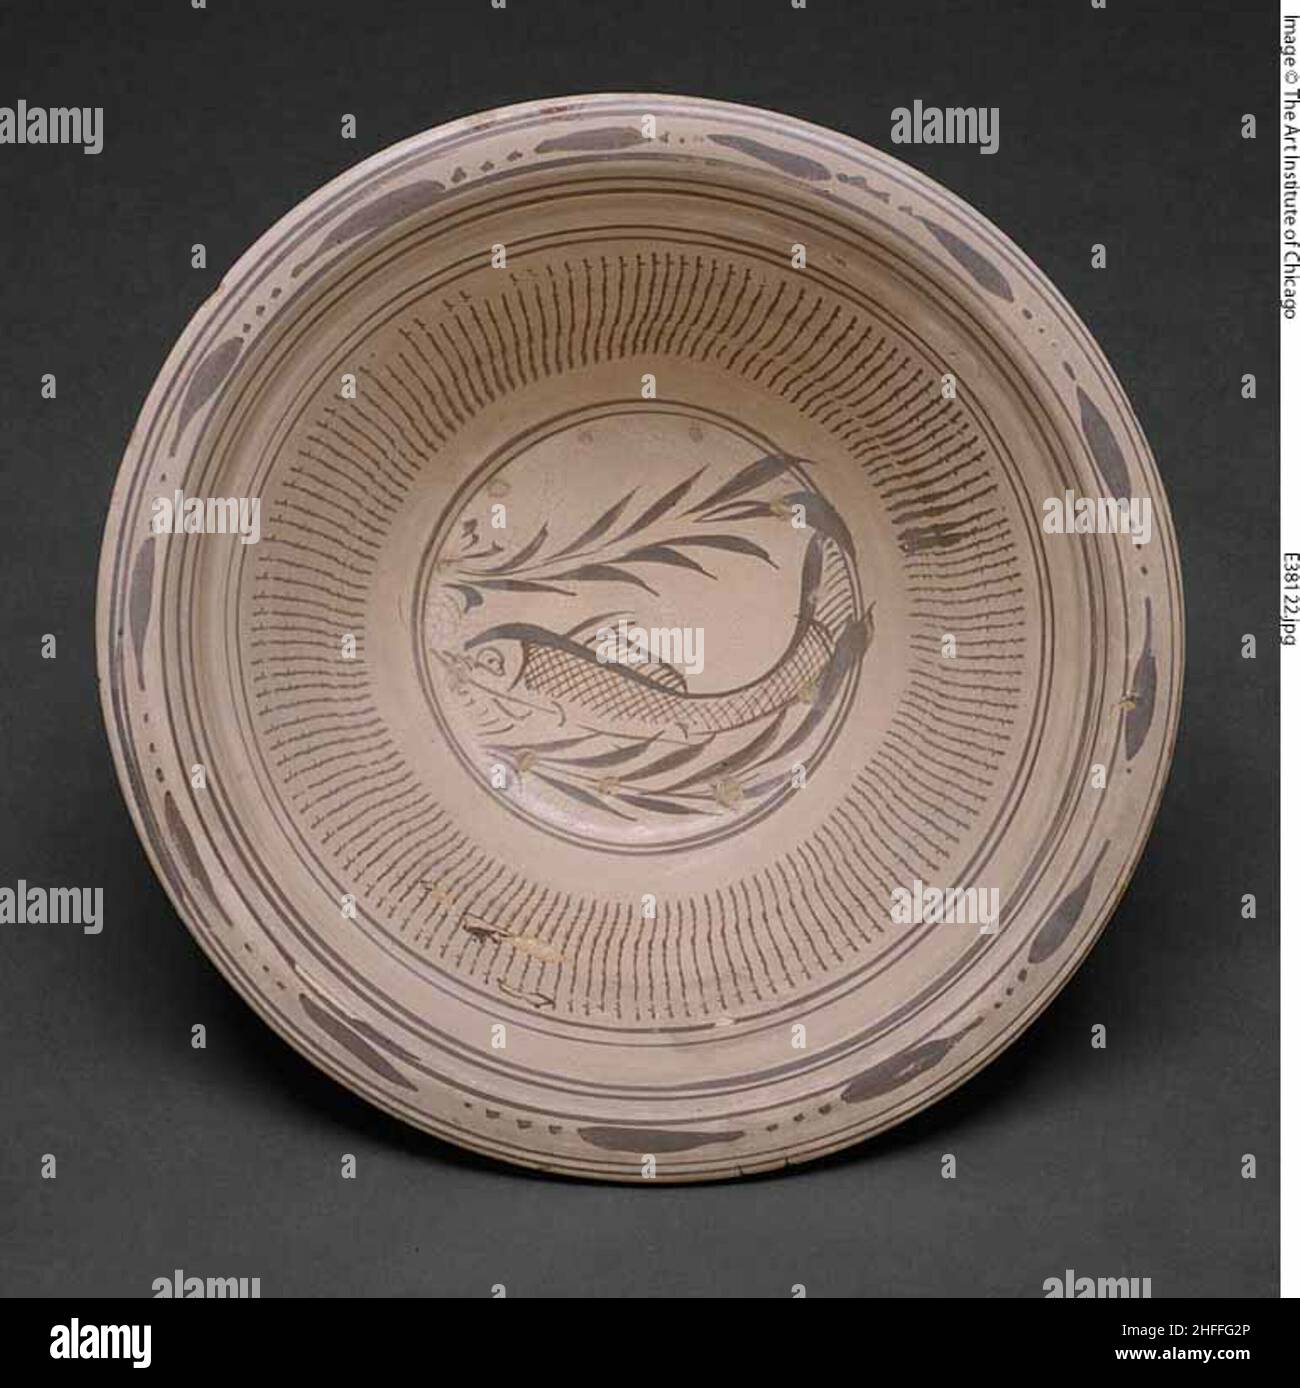 Large Basin with Carp and Waterweeds, Yuan dynasty (1279-1368), late 13th/early 14th century. Stock Photo